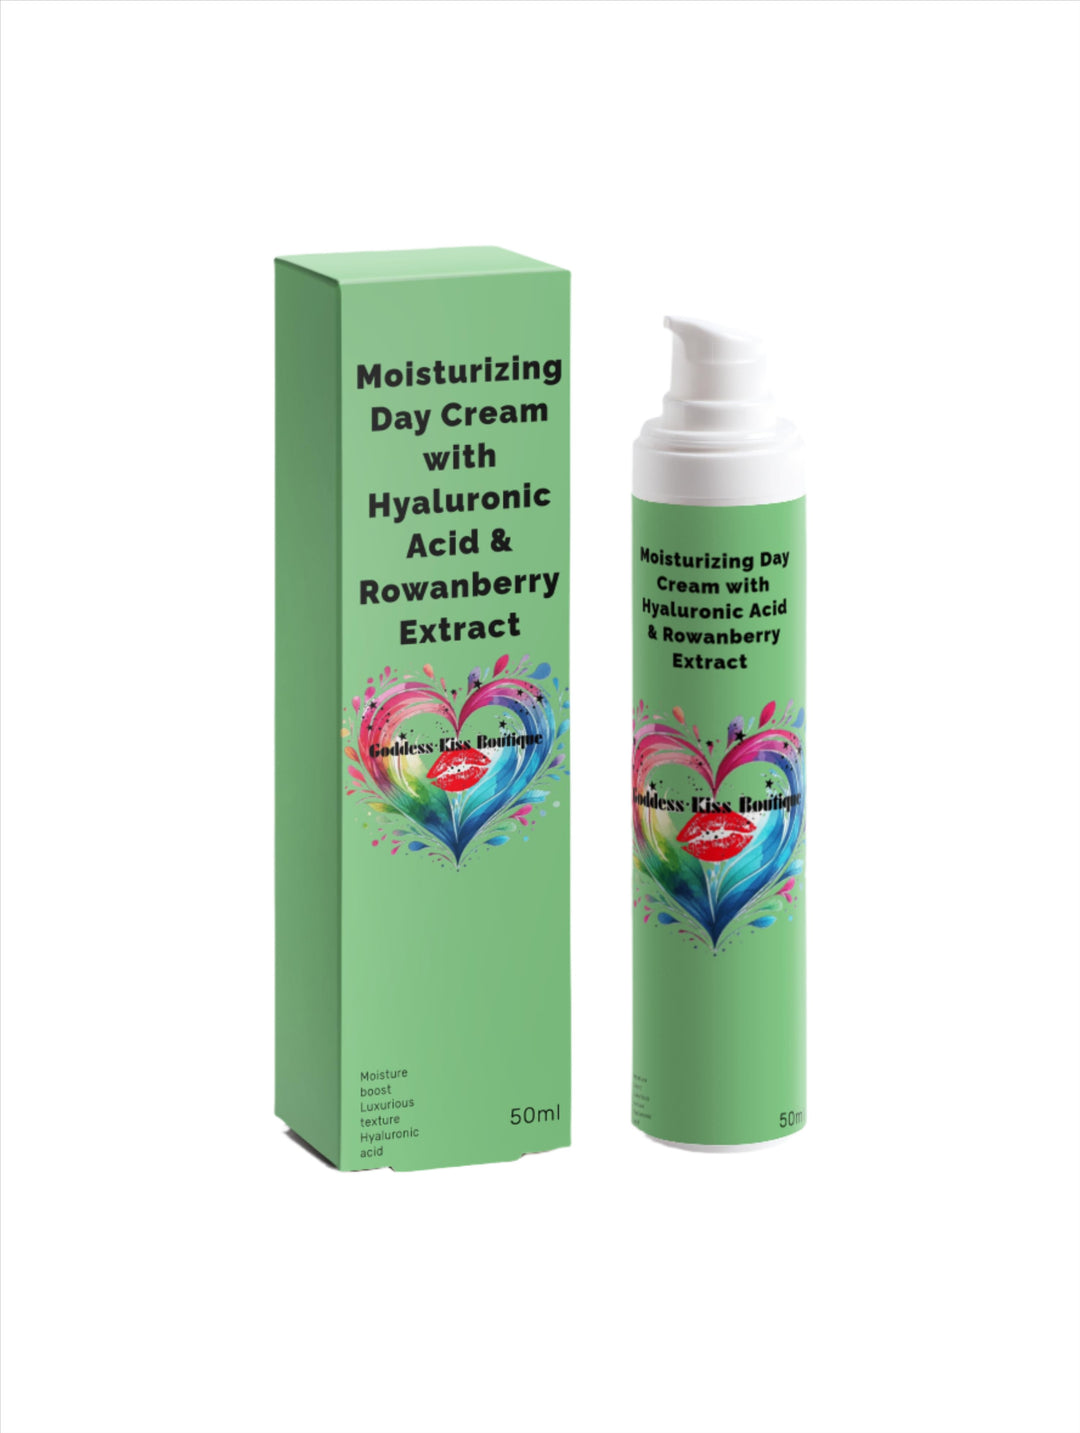 Moisturizing Day Cream with Hyaluronic Acid & Rowanberry Extract - Instant Hydration & Nourishment